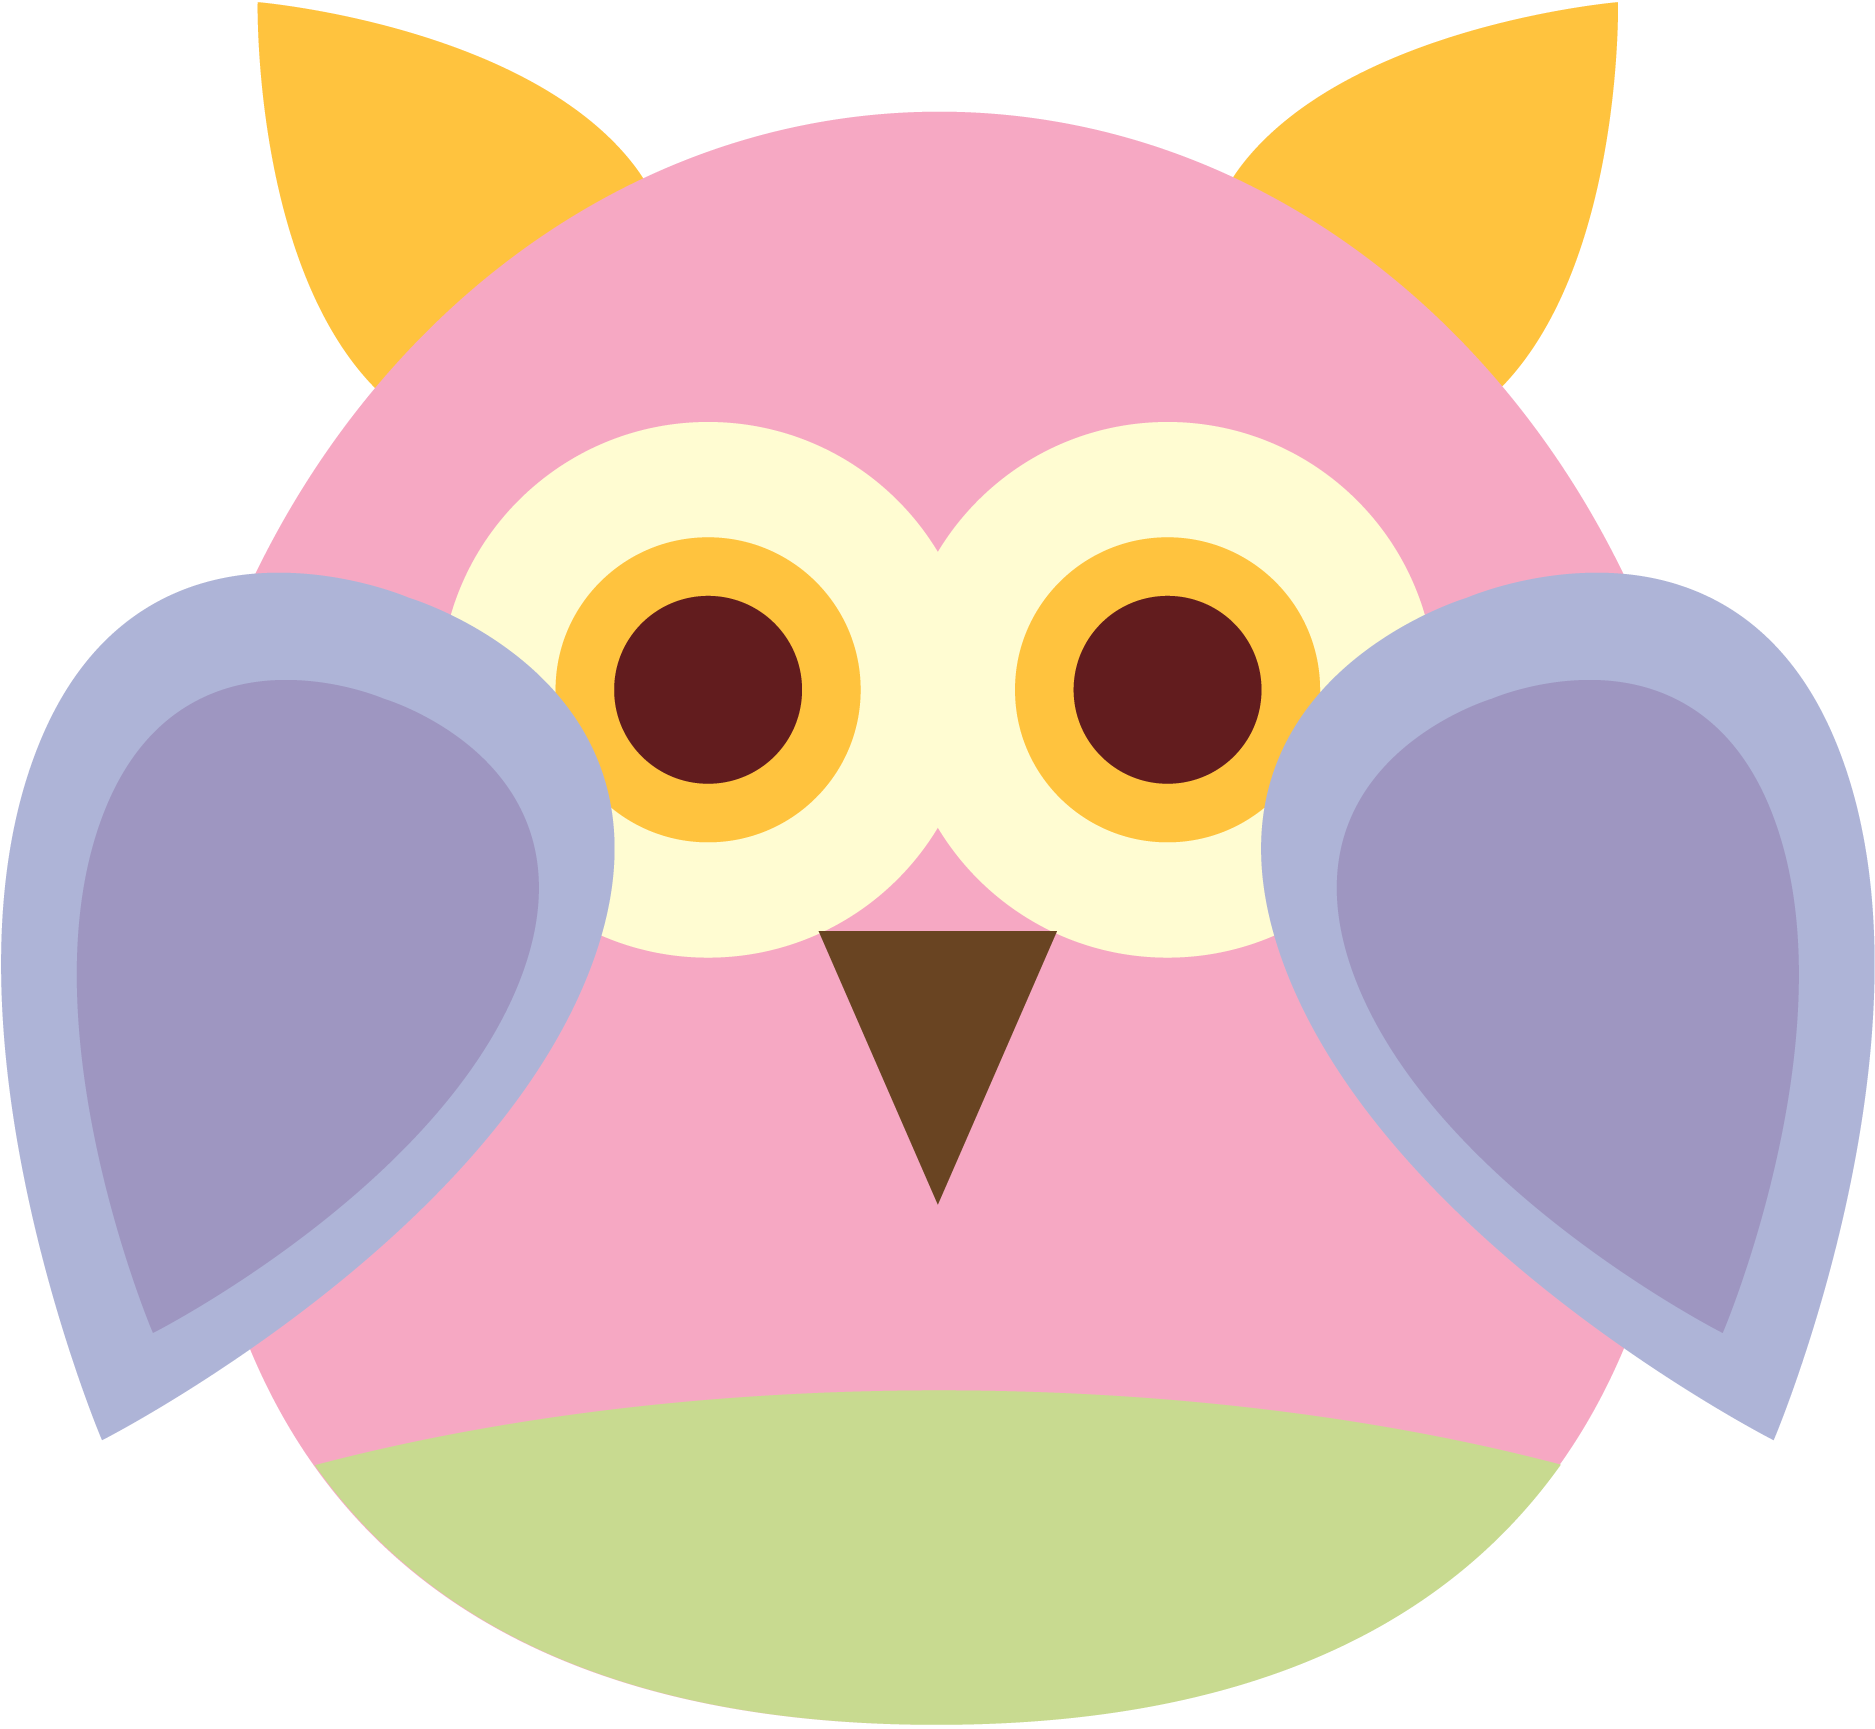 Cute Owl Clipart And It S Free Click On The Image To See It Larger